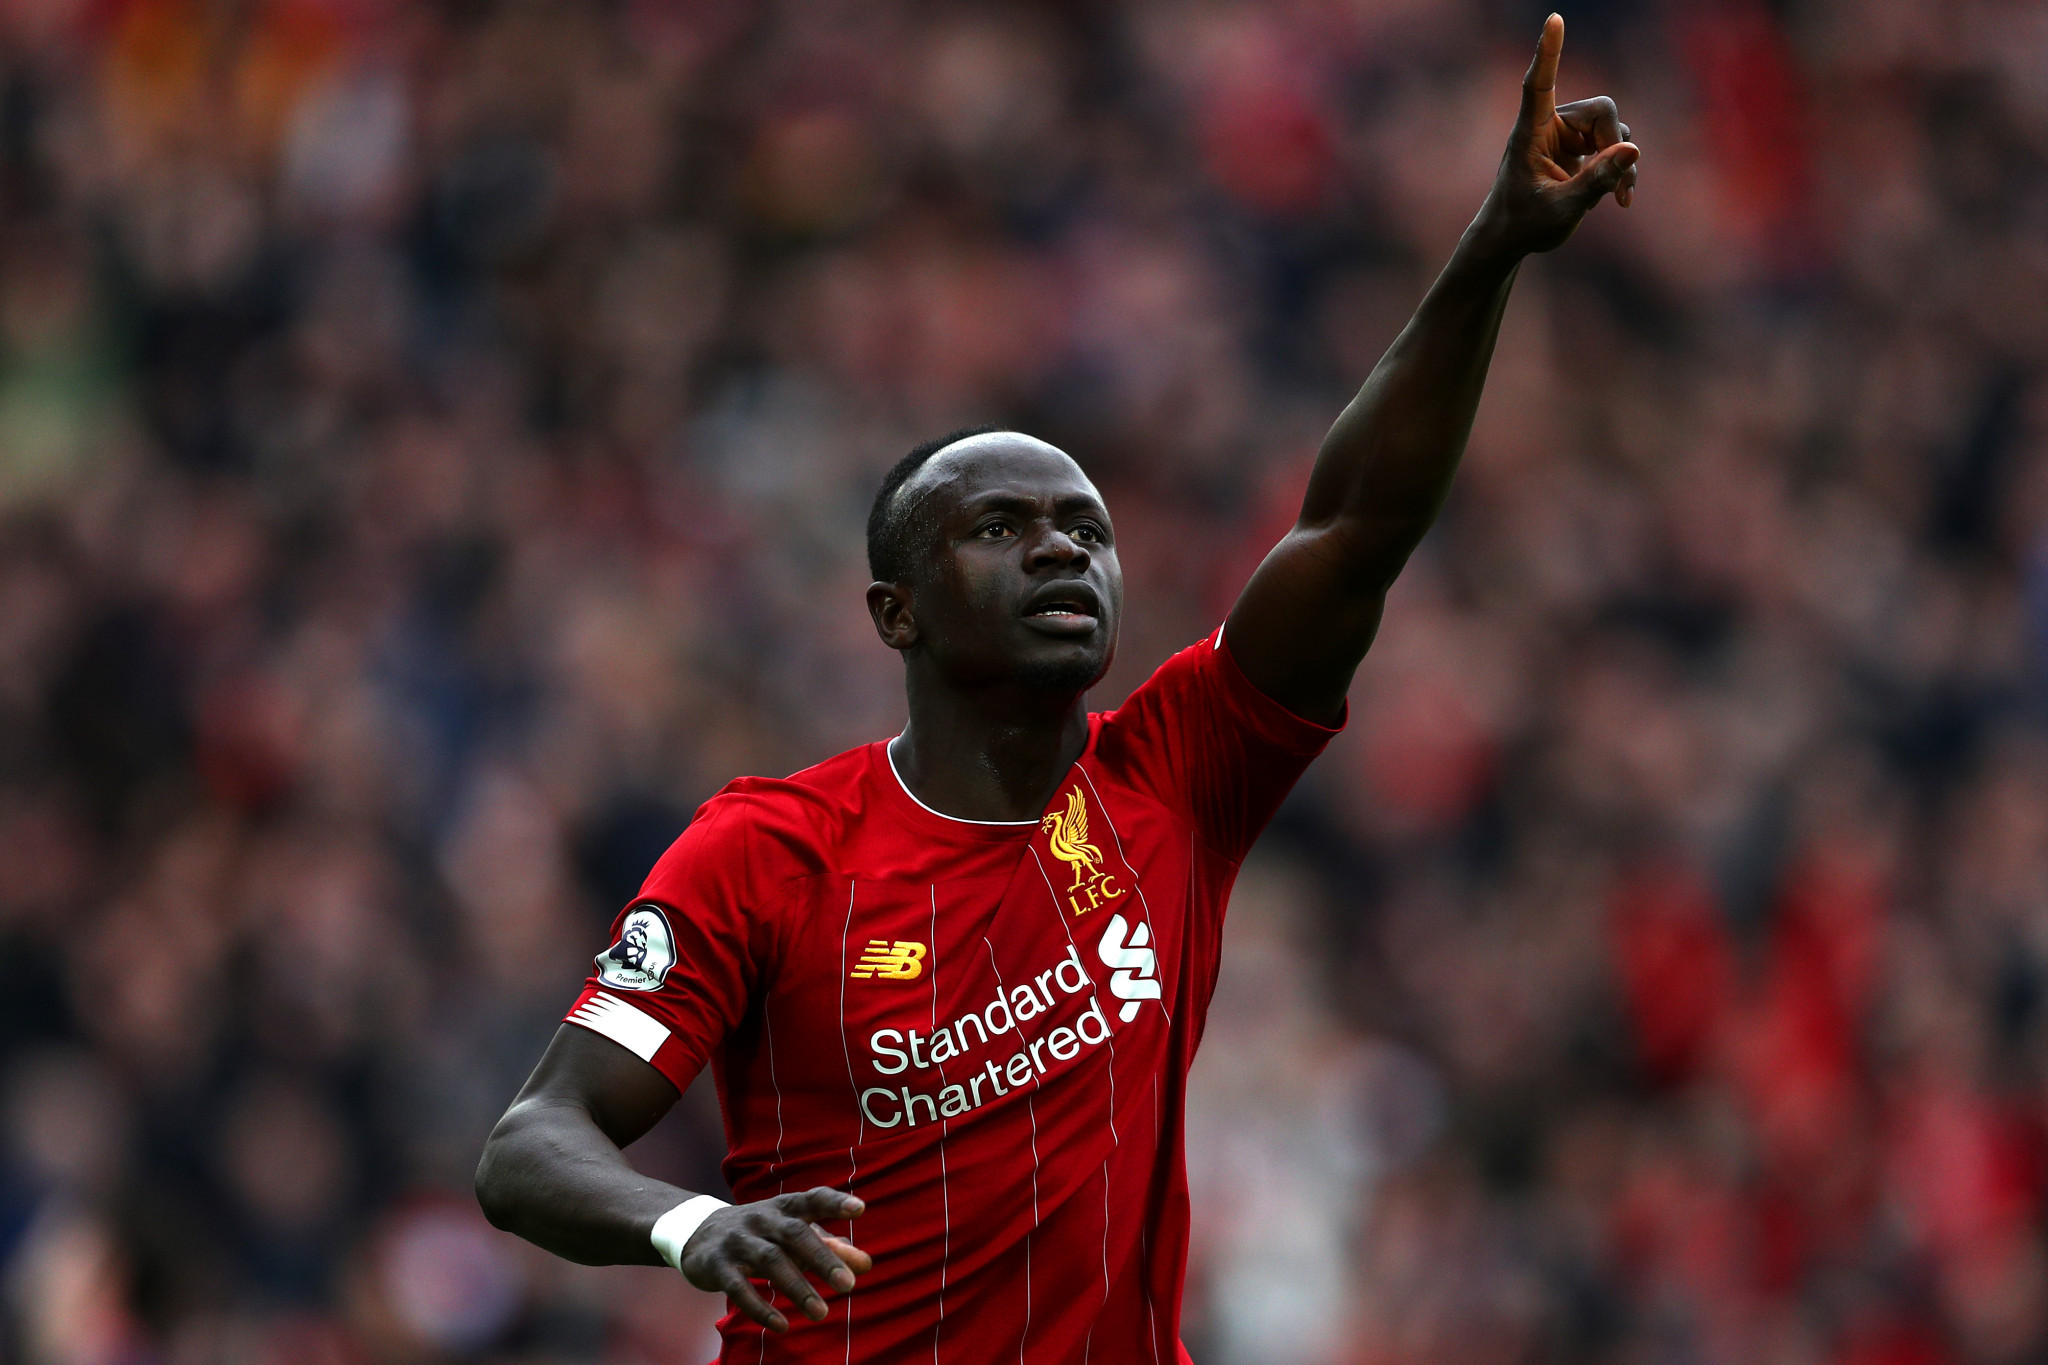 Although the likes of Sadio Mané made it in football, the STF are looking to capture footballers who did not make it ©Getty Images